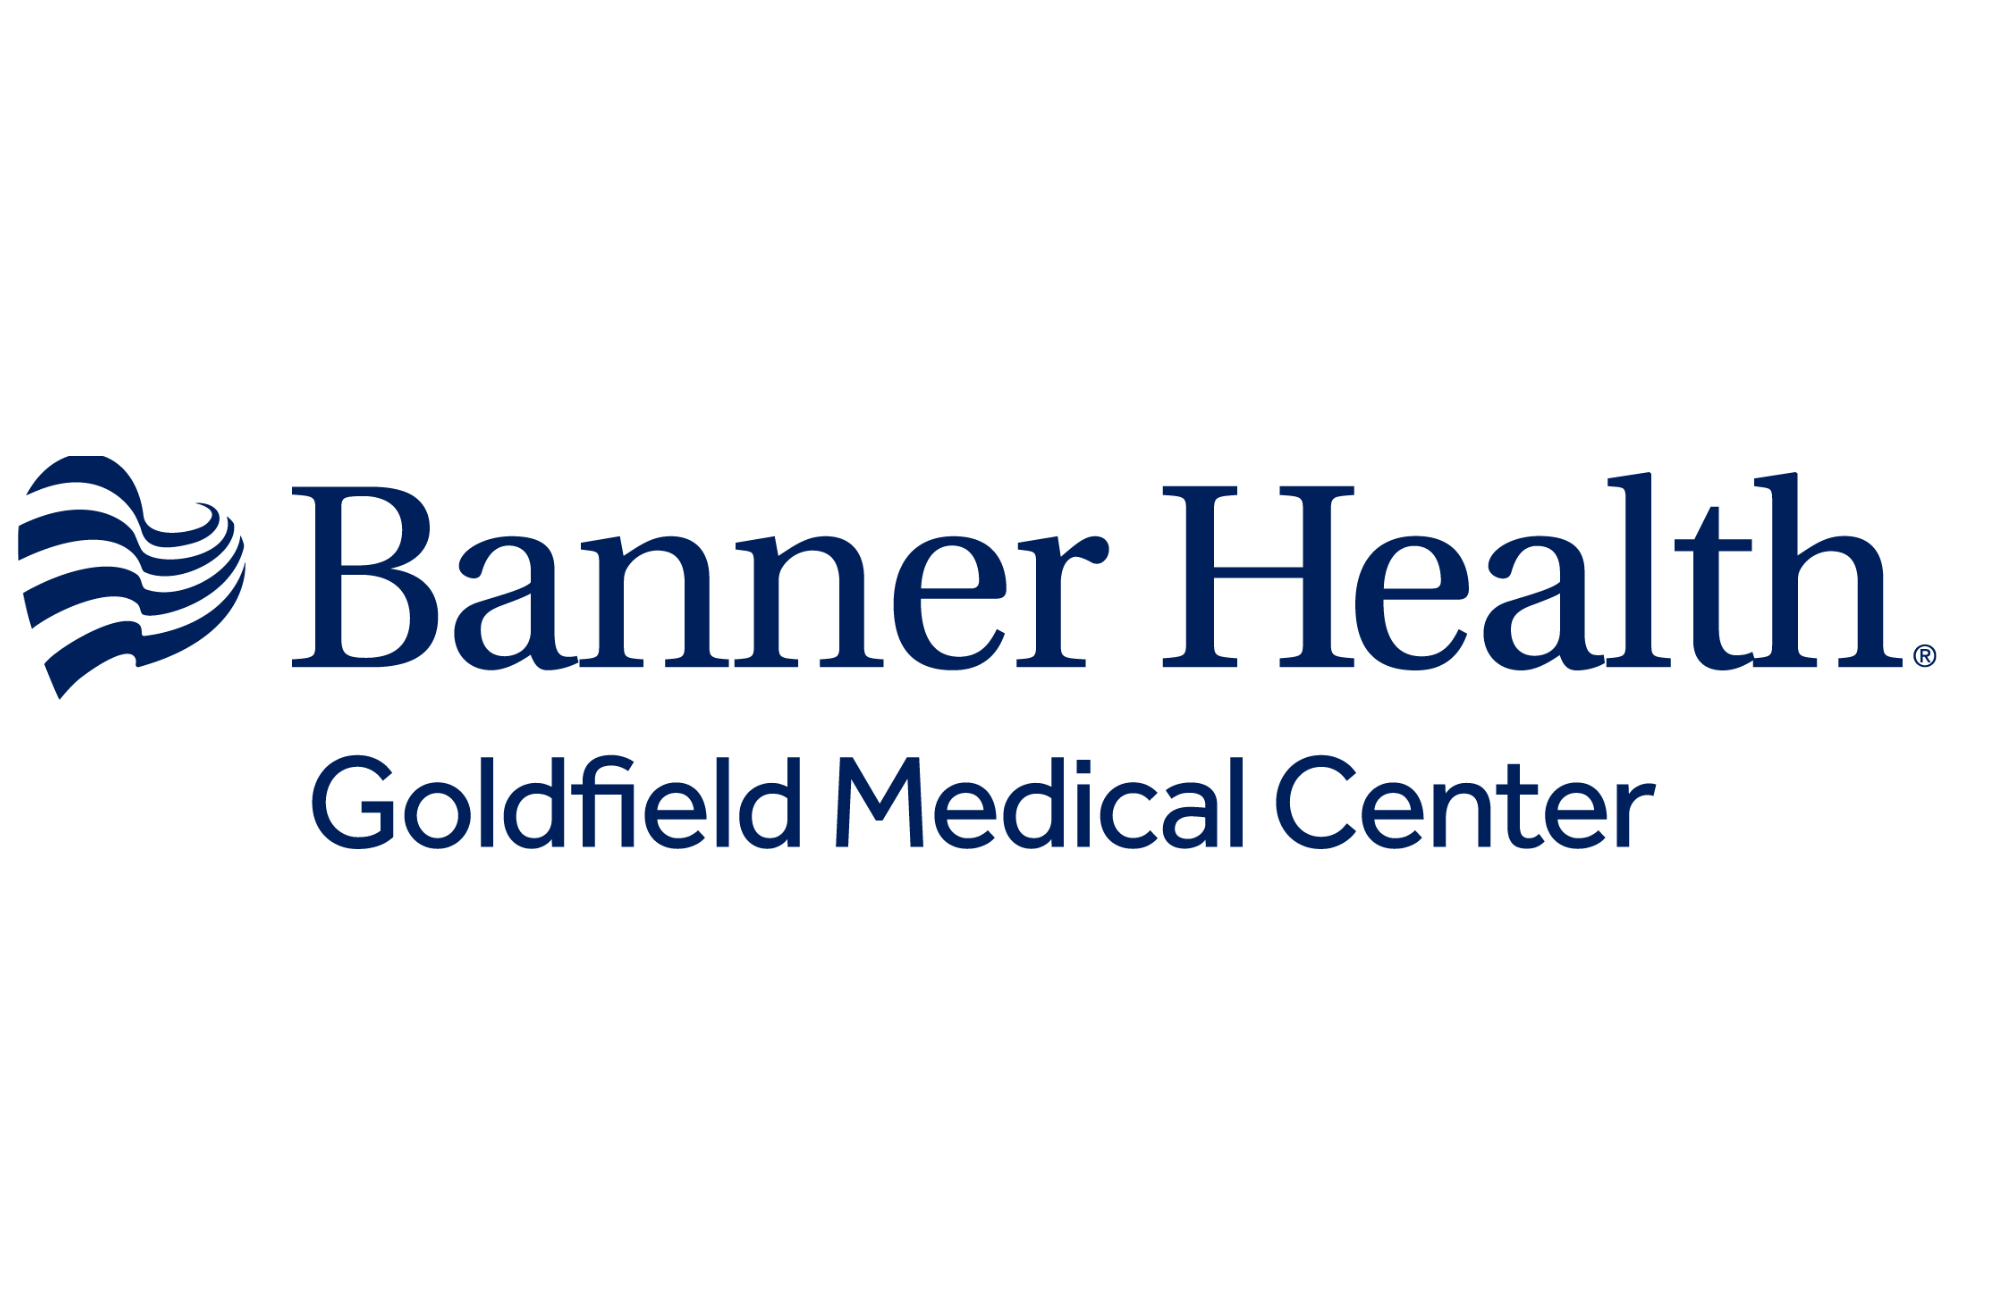 Thank you to Banner Goldfield Medical Center for being a Double Eagle Sponsor for our 2022 Superstition Open Golf Tournament.